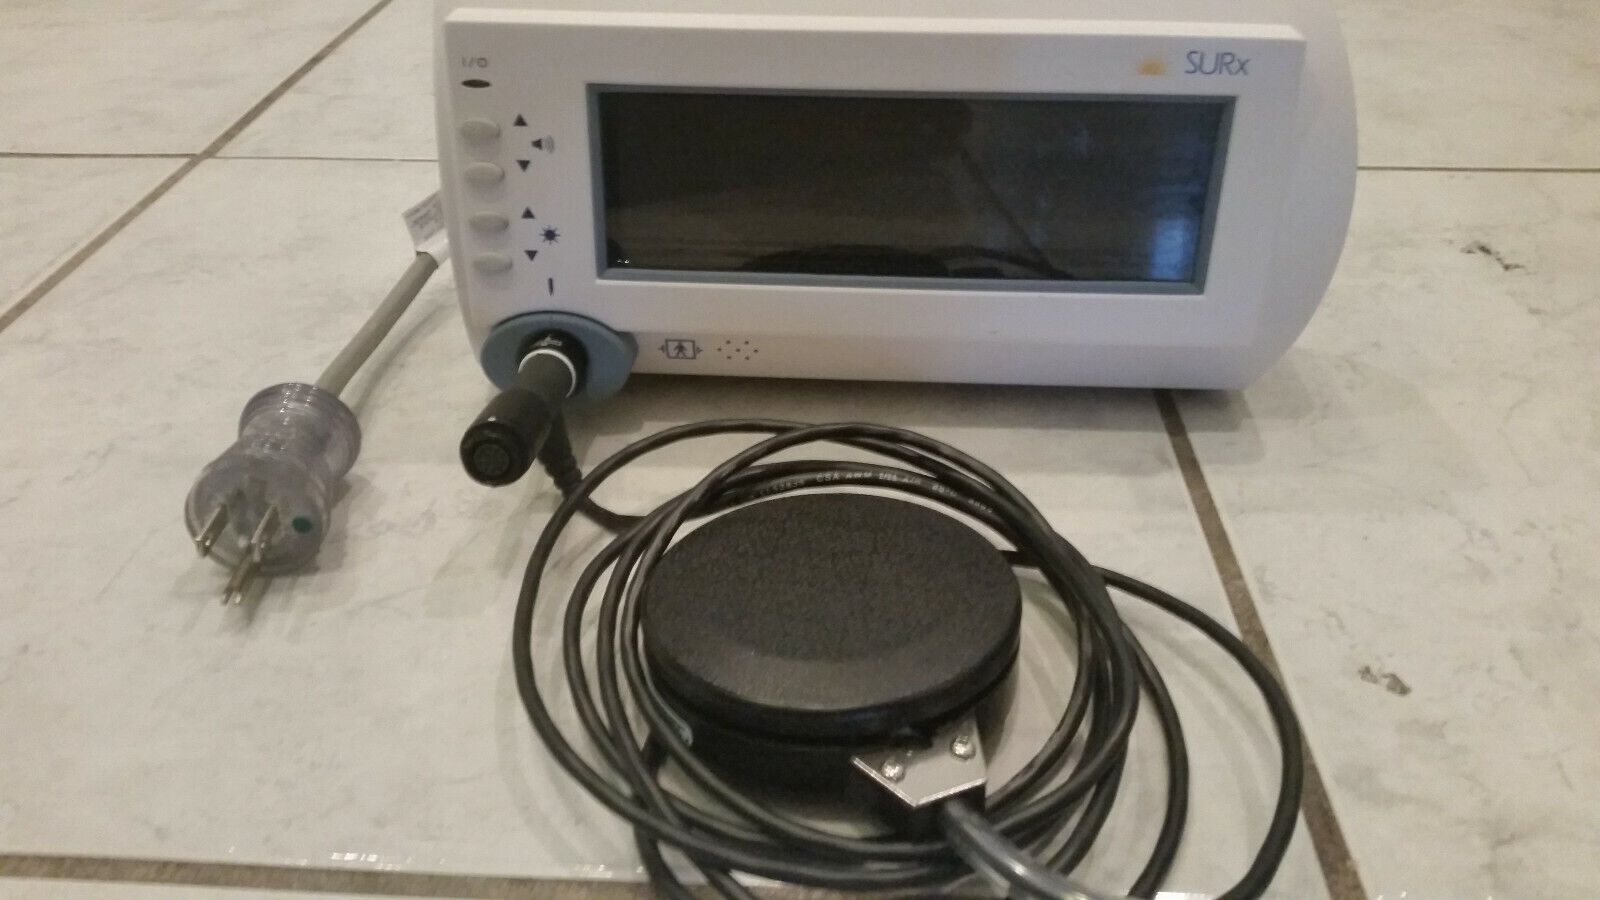 SurX RFGEN2501 Radio Frequency Generator with foot pedal